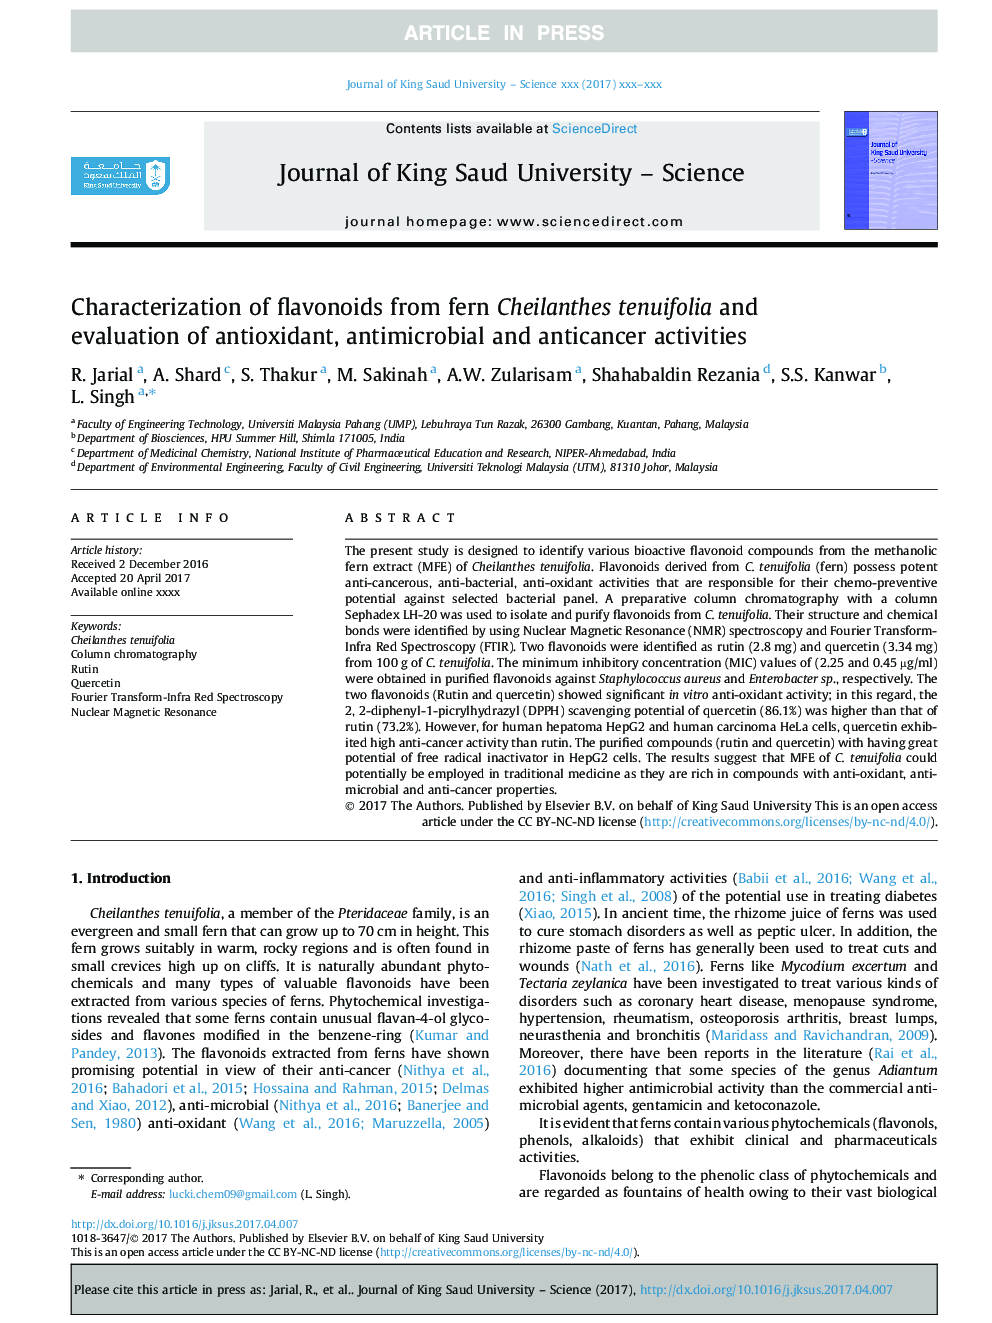 Characterization of flavonoids from fern Cheilanthes tenuifolia and evaluation of antioxidant, antimicrobial and anticancer activities